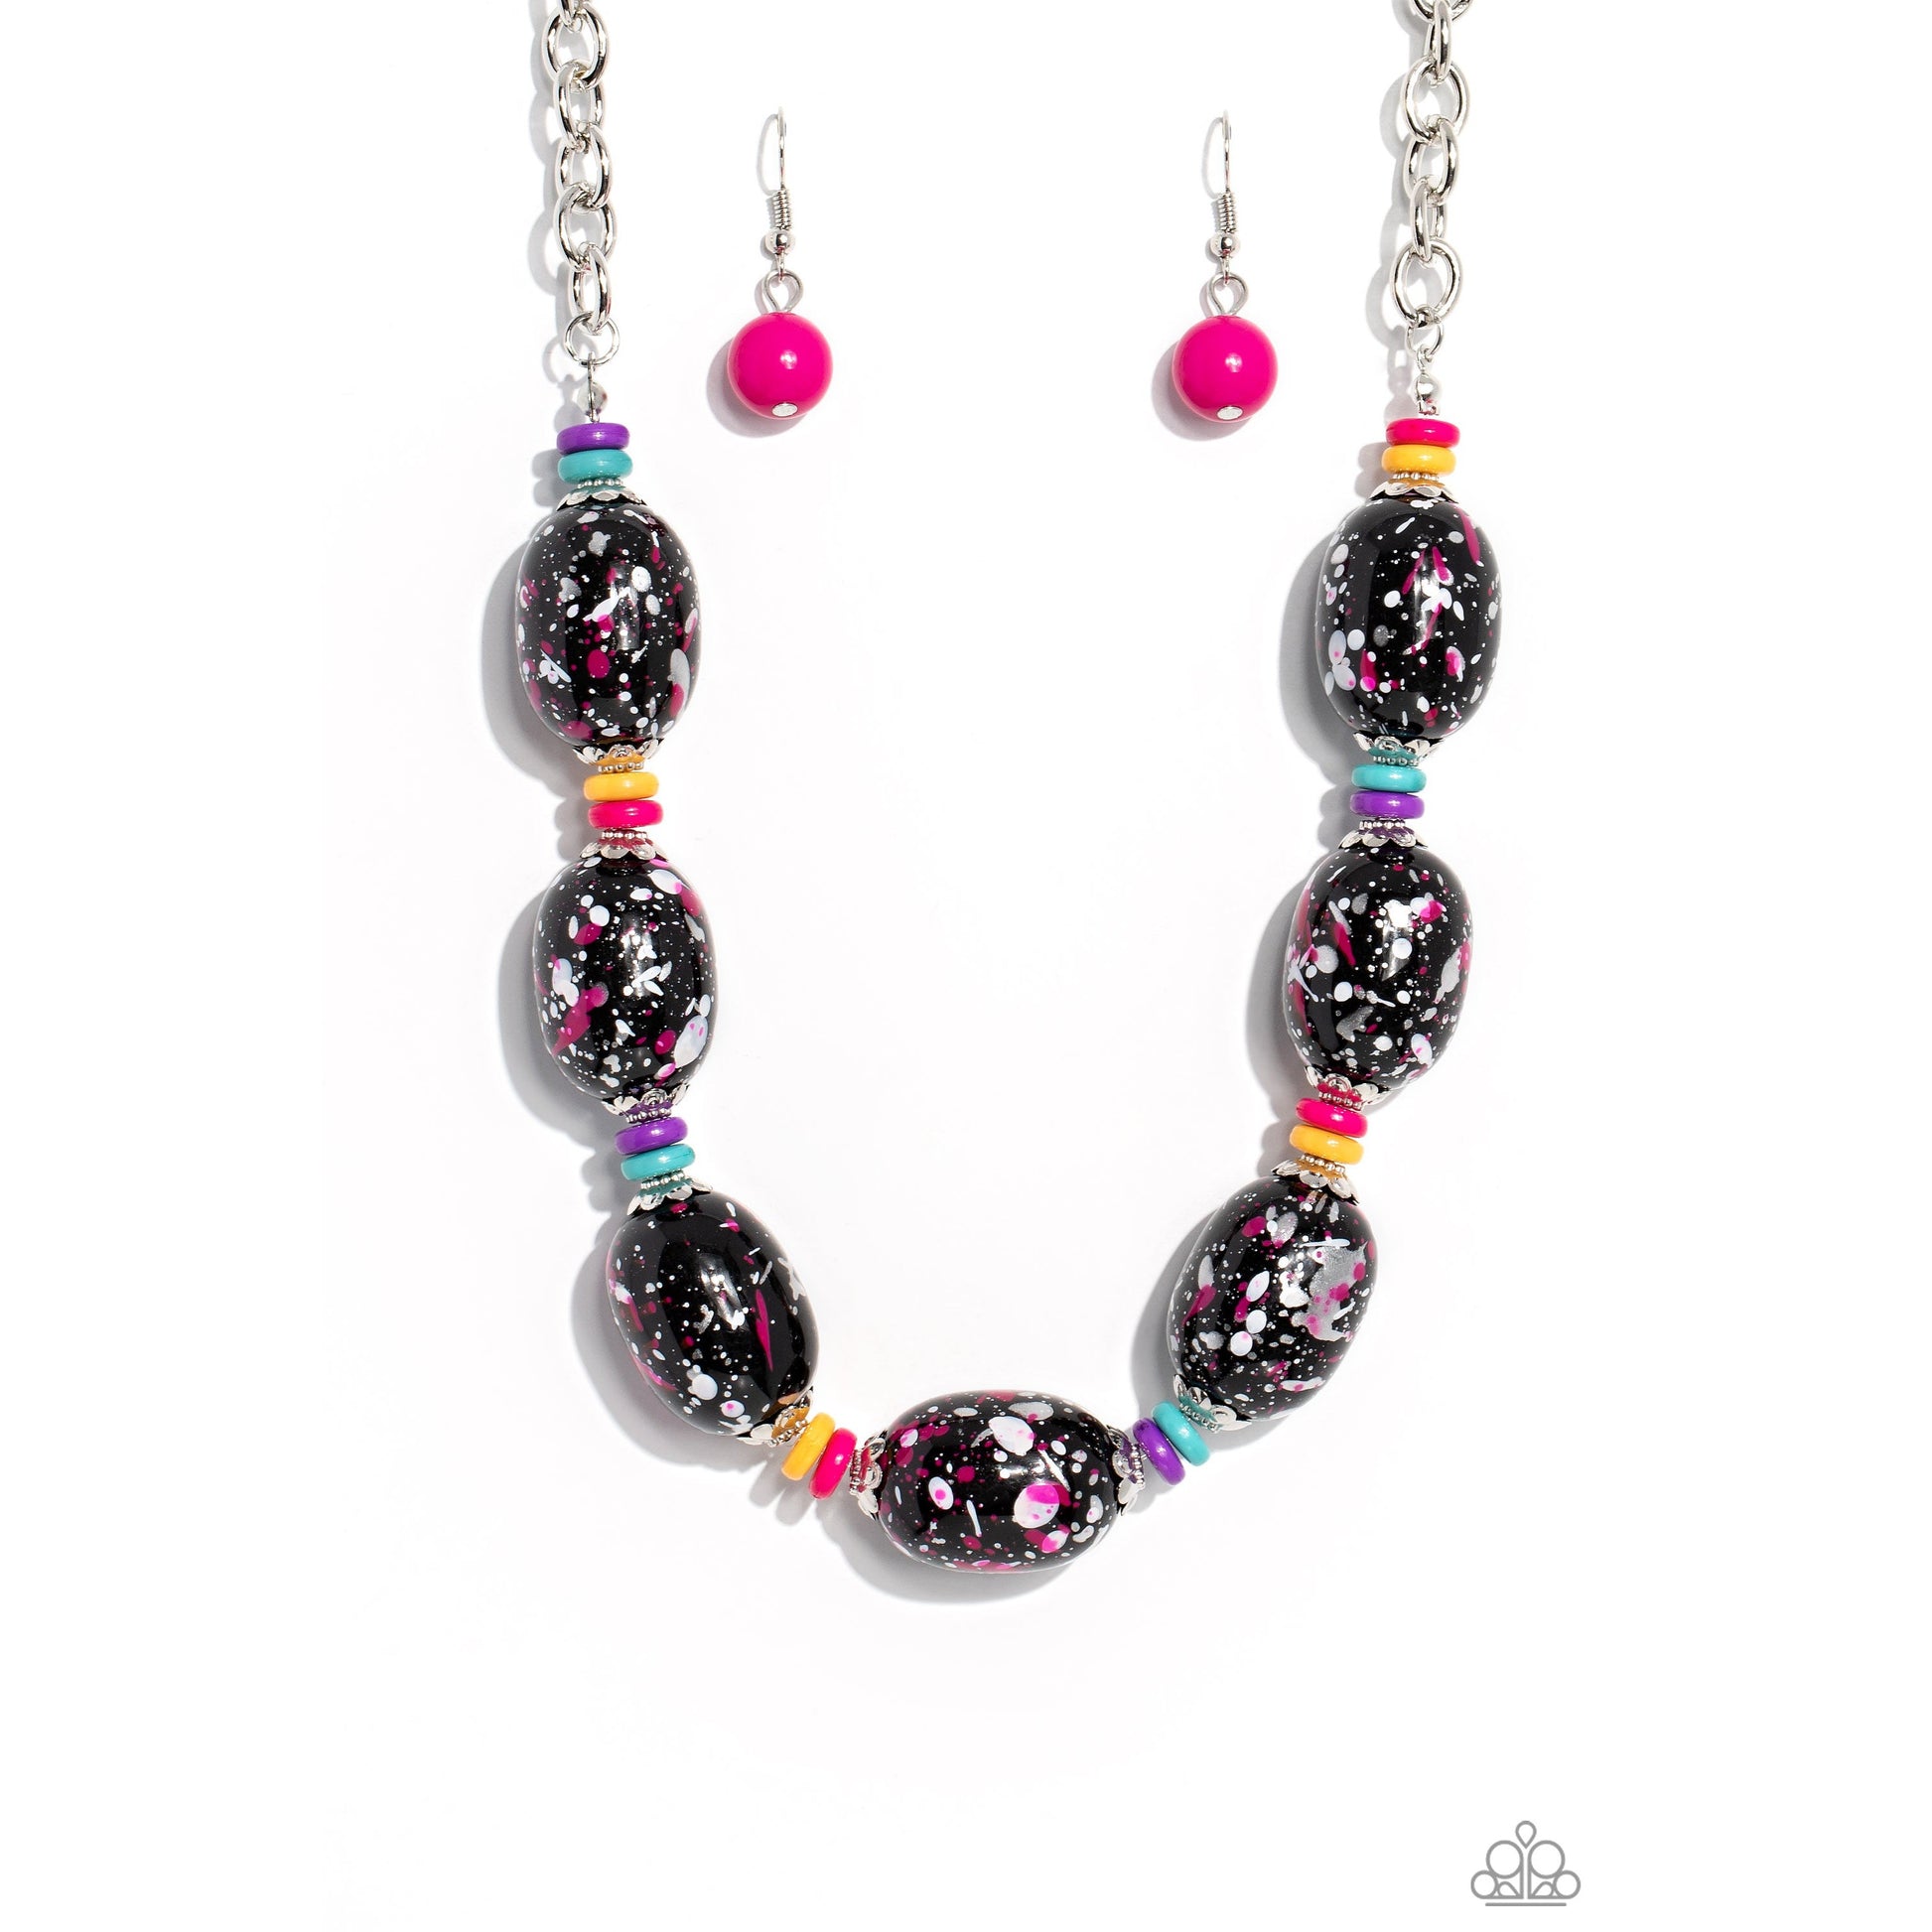 No Laughing SPLATTER - Pink Necklace - Bling by Danielle Baker